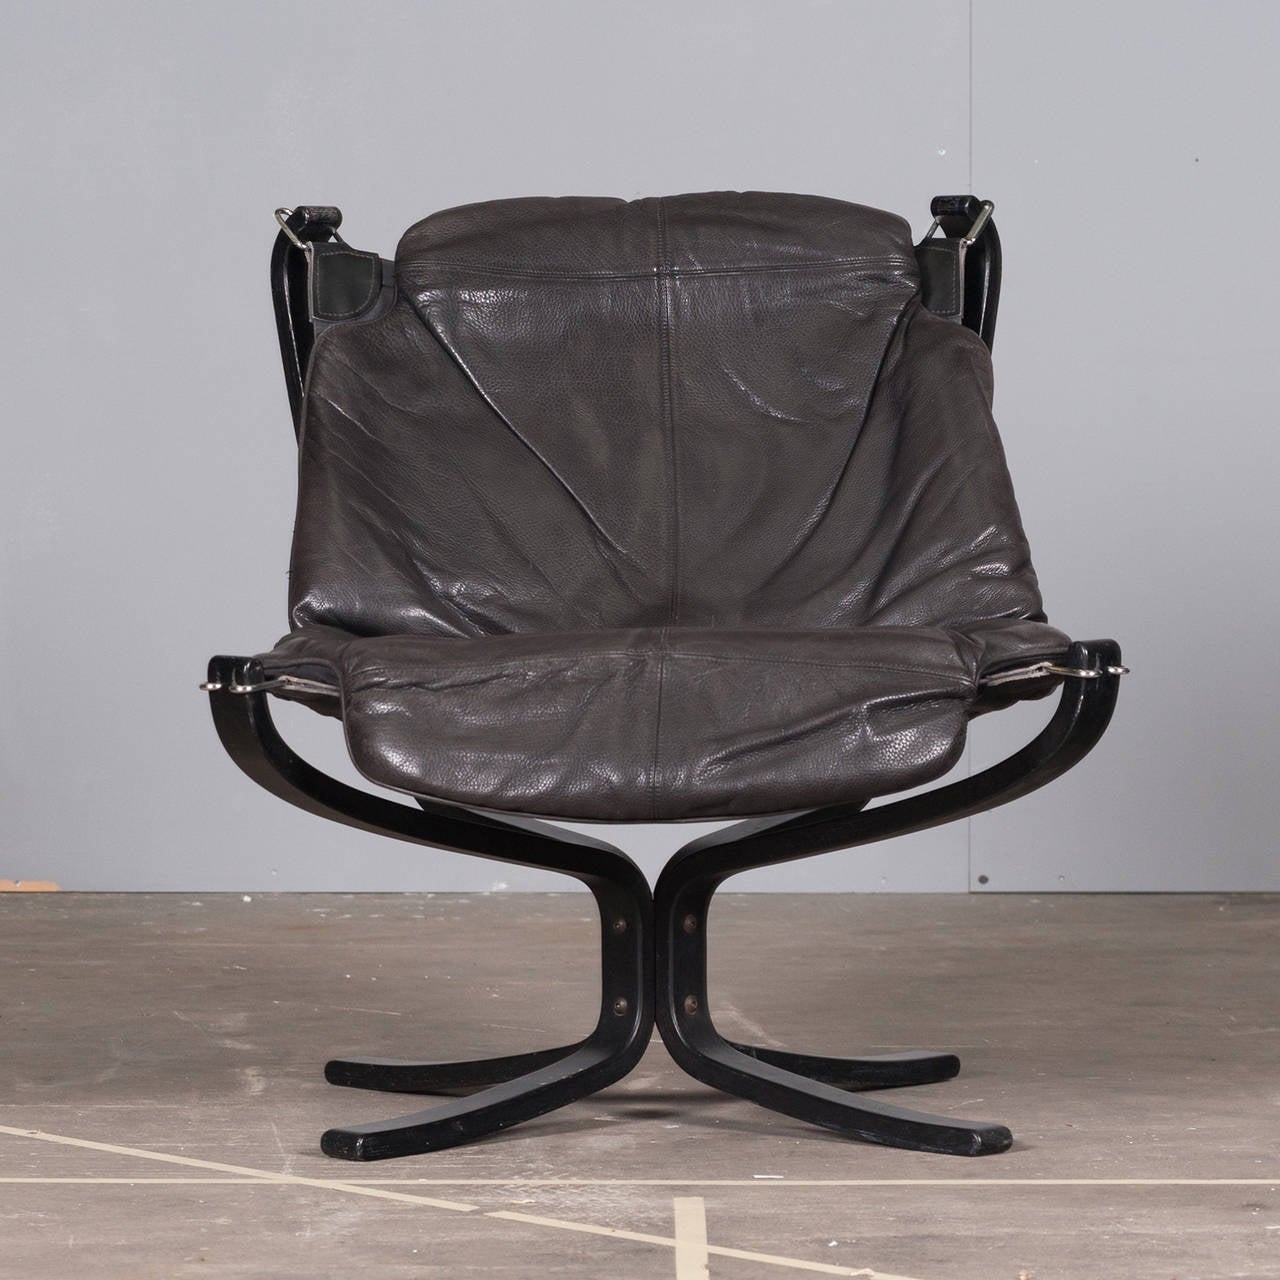 The High Back Falcon Chair is an iconic Norwegian design piece. Originally designed in 1971 and manufactured by Vatne Mobler Norway. With a light appearance, hammock style seat, vintage leather cushioning and solid steel frame, this impressive piece